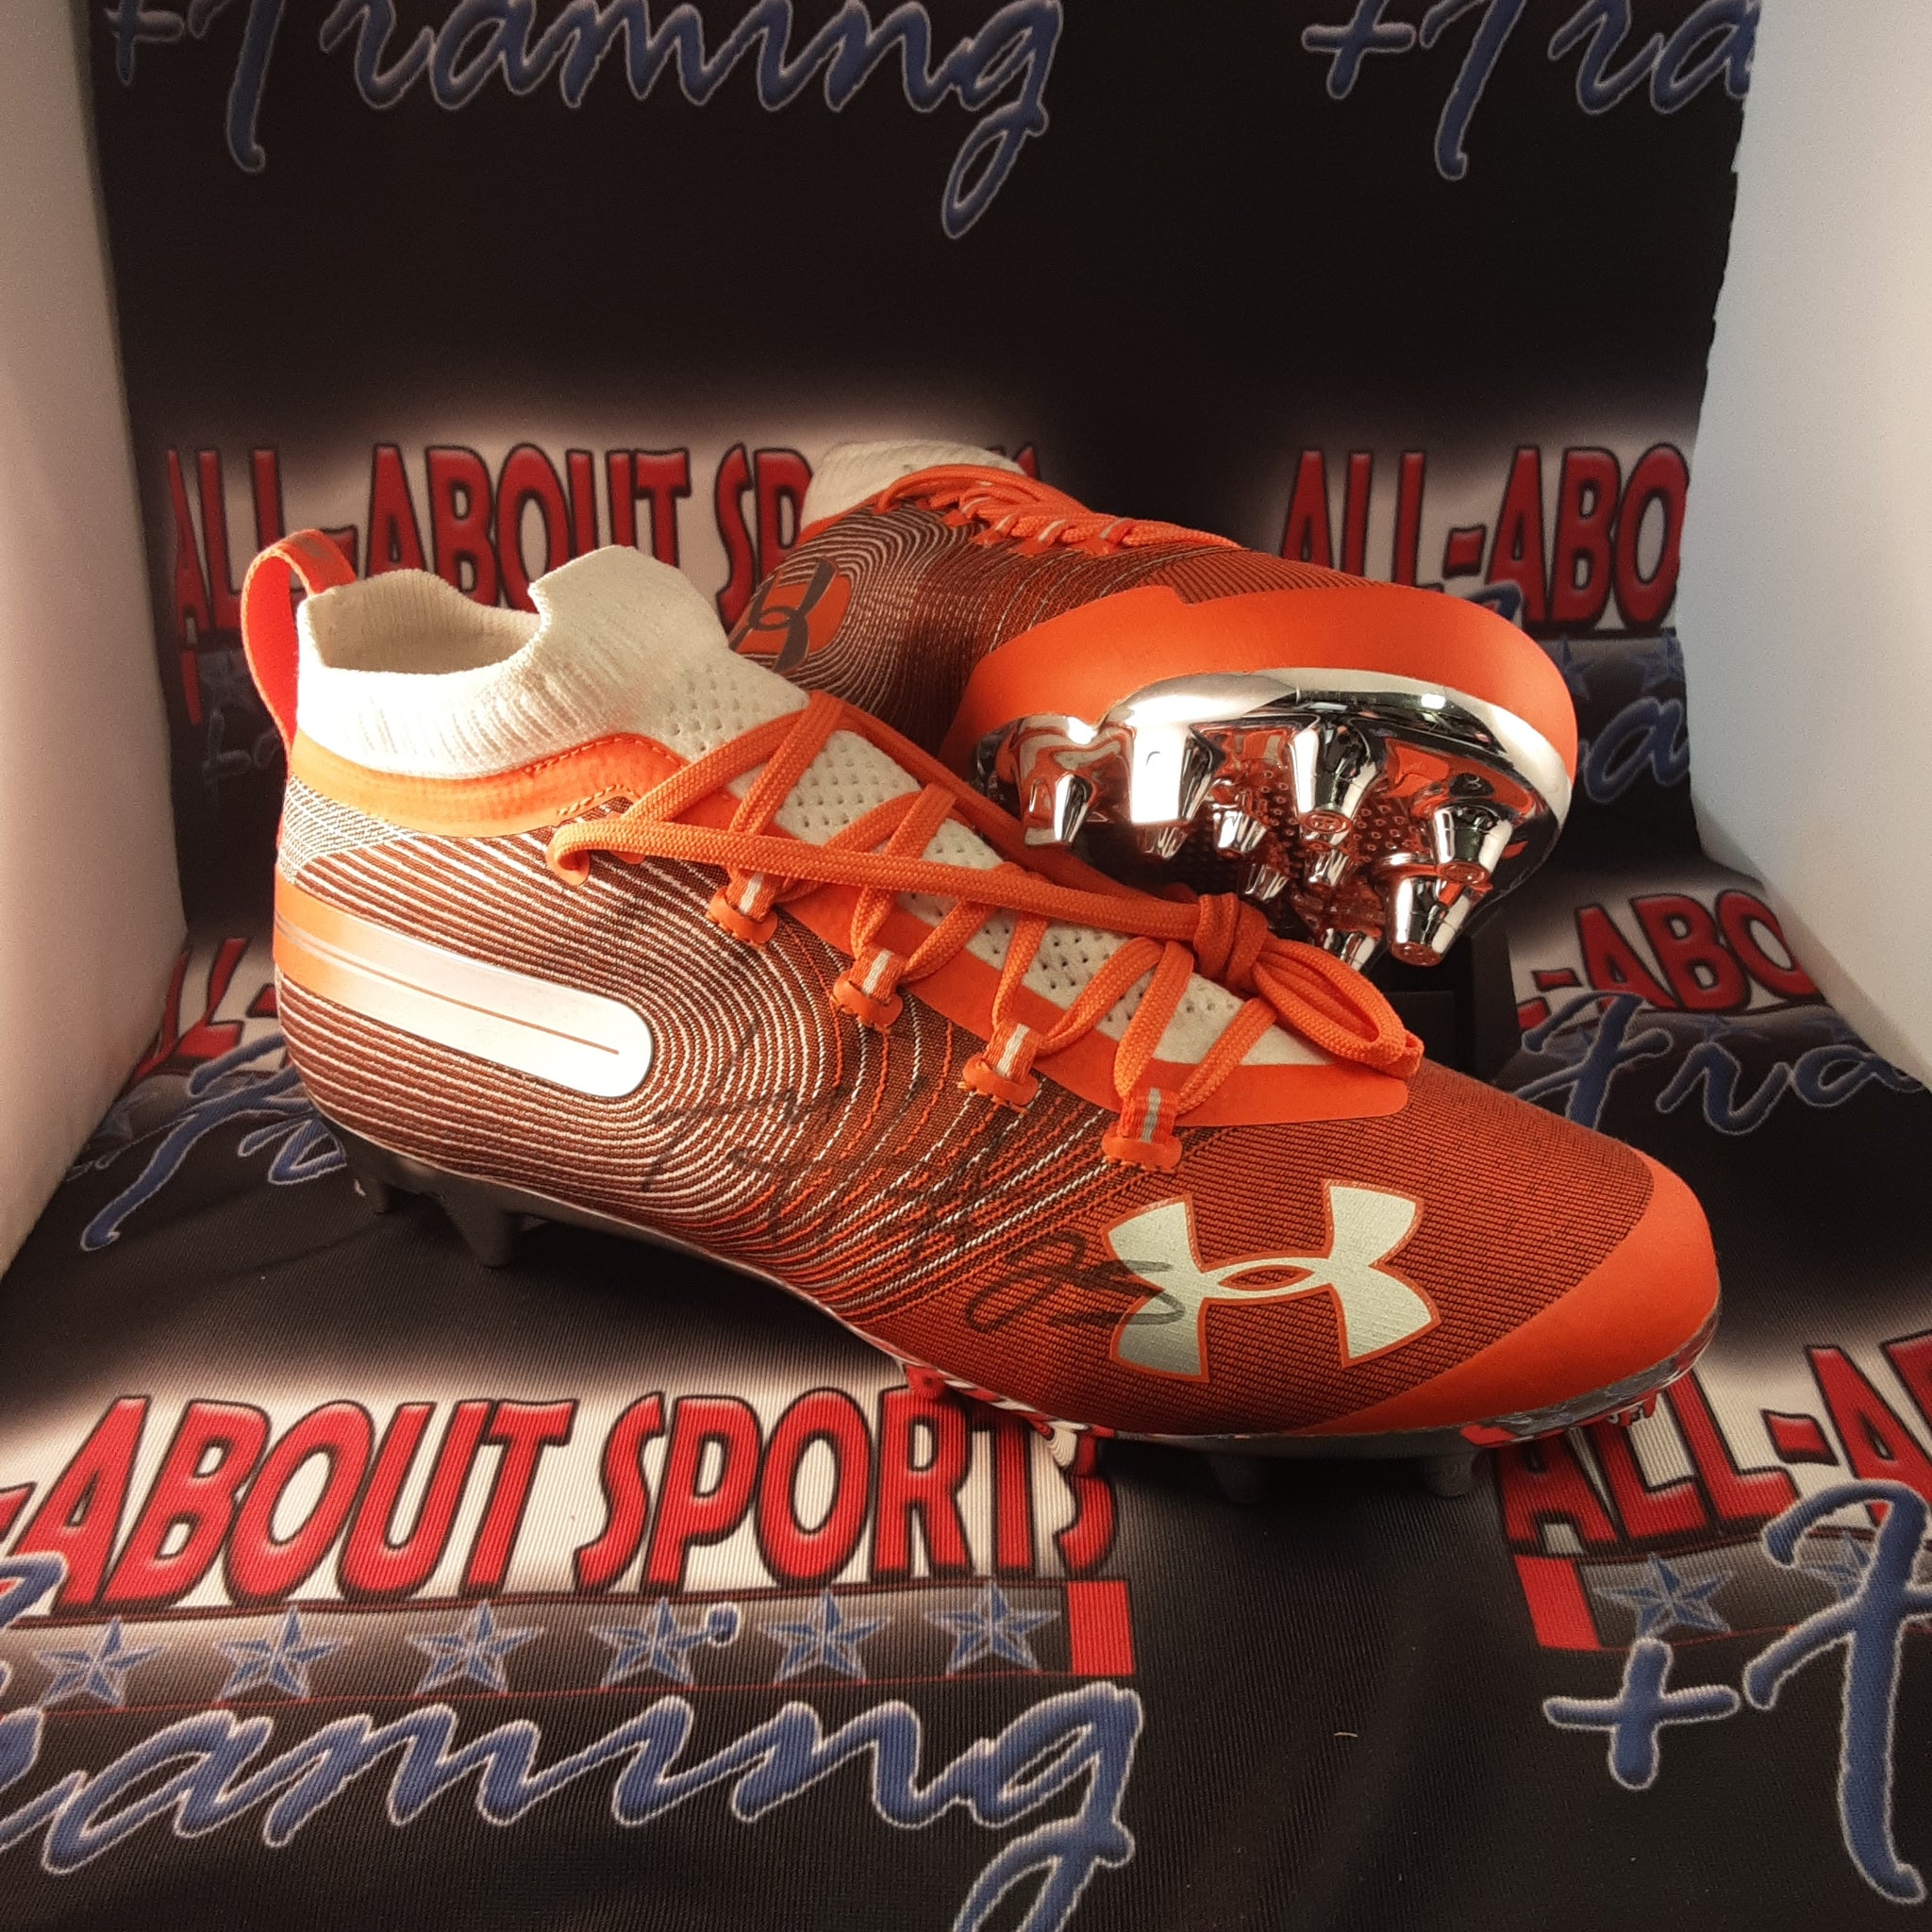 Xavien Howard Authentic Signed Game Used Cleats Autographed JSA